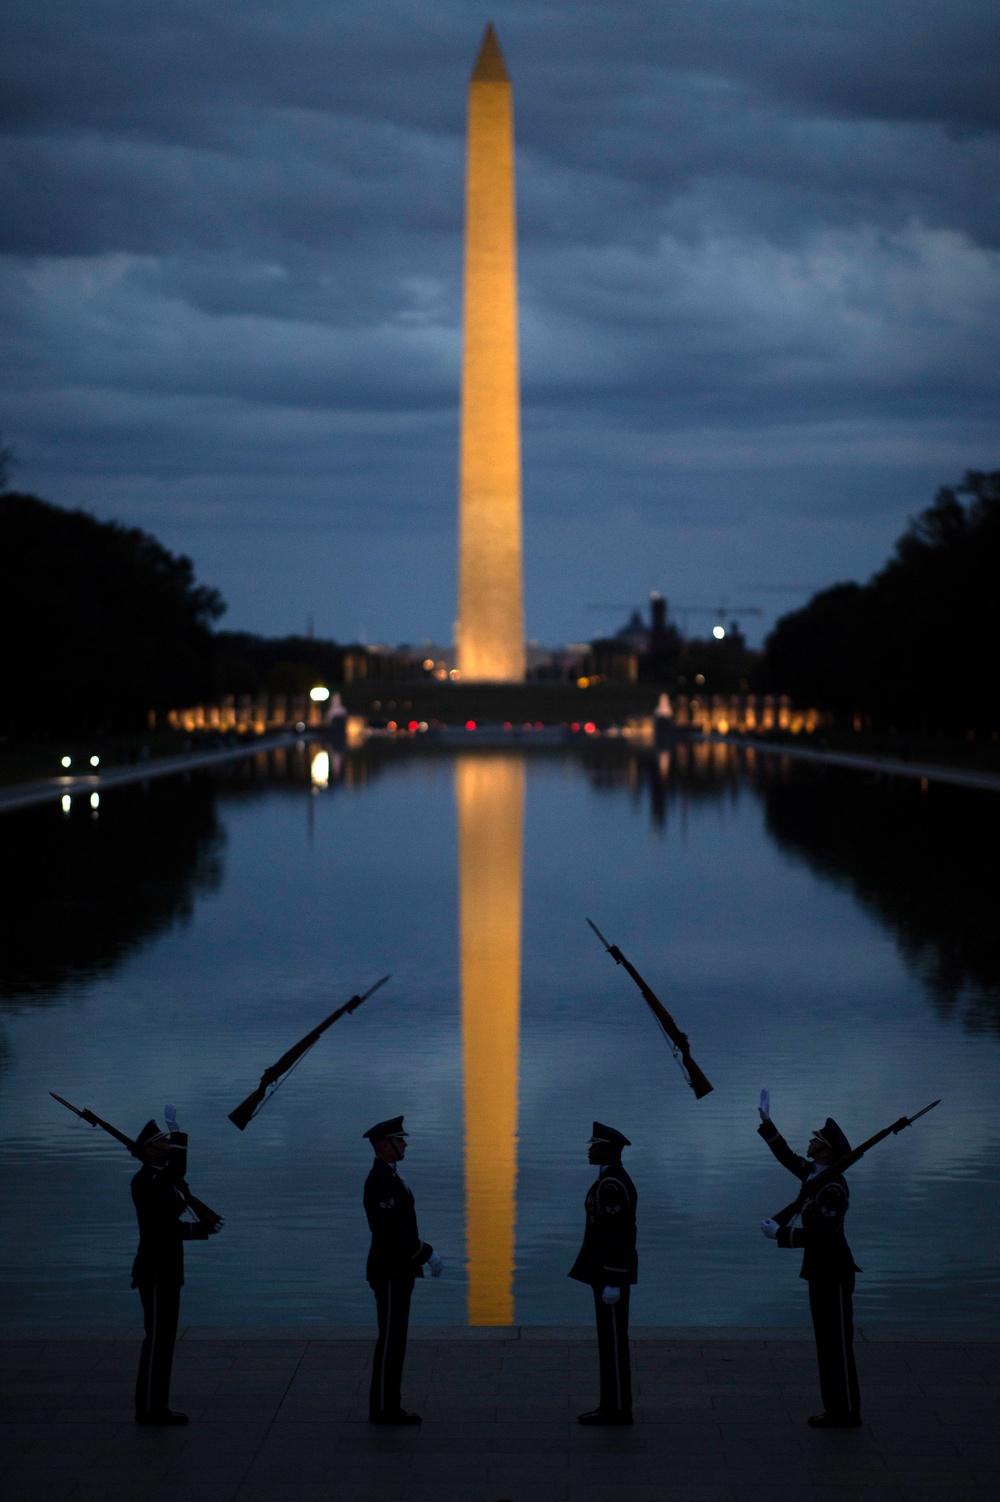 USAF Honor Guard Practices at the Lincoln Memorial